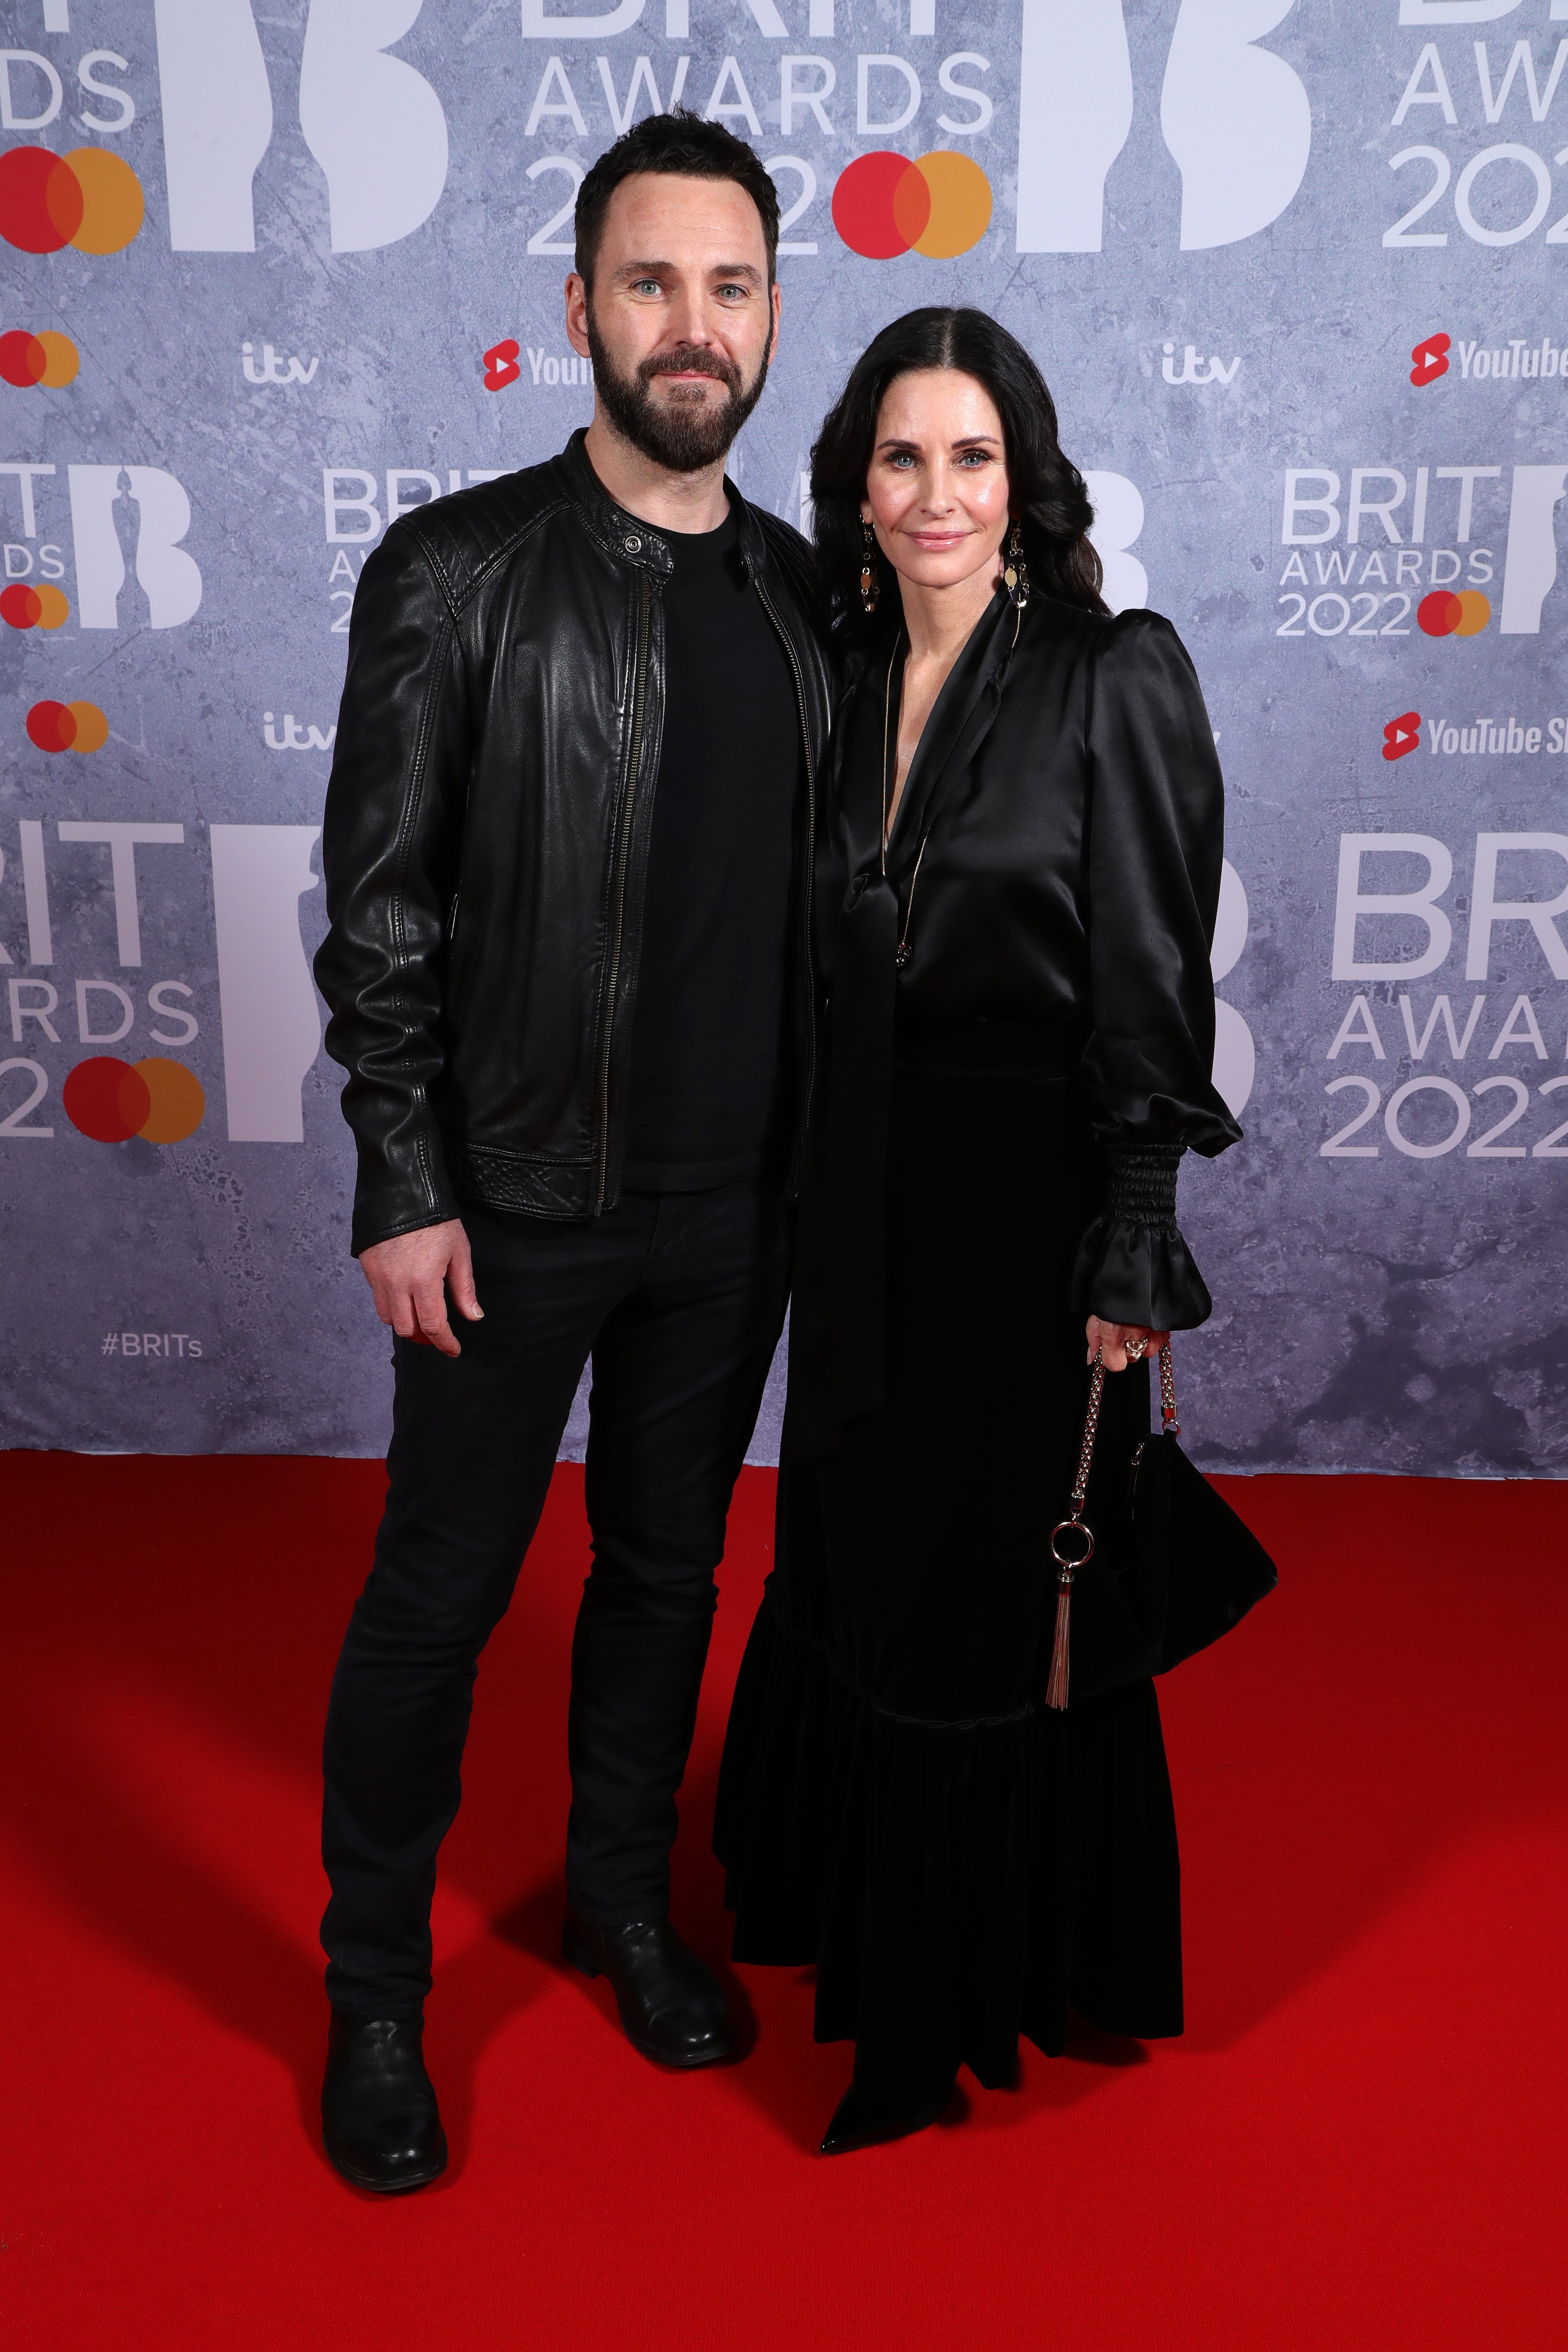 LONDON, ENGLAND - FEBRUARY 08: (EDITORIAL USE ONLY) Johnny McDaid and Courteney Cox attend The BRIT Awards 2022 at The O2 Arena on February 08, 2022 in London, England. (Photo by JMEnternational/Getty Images) (Foto: Getty Images)